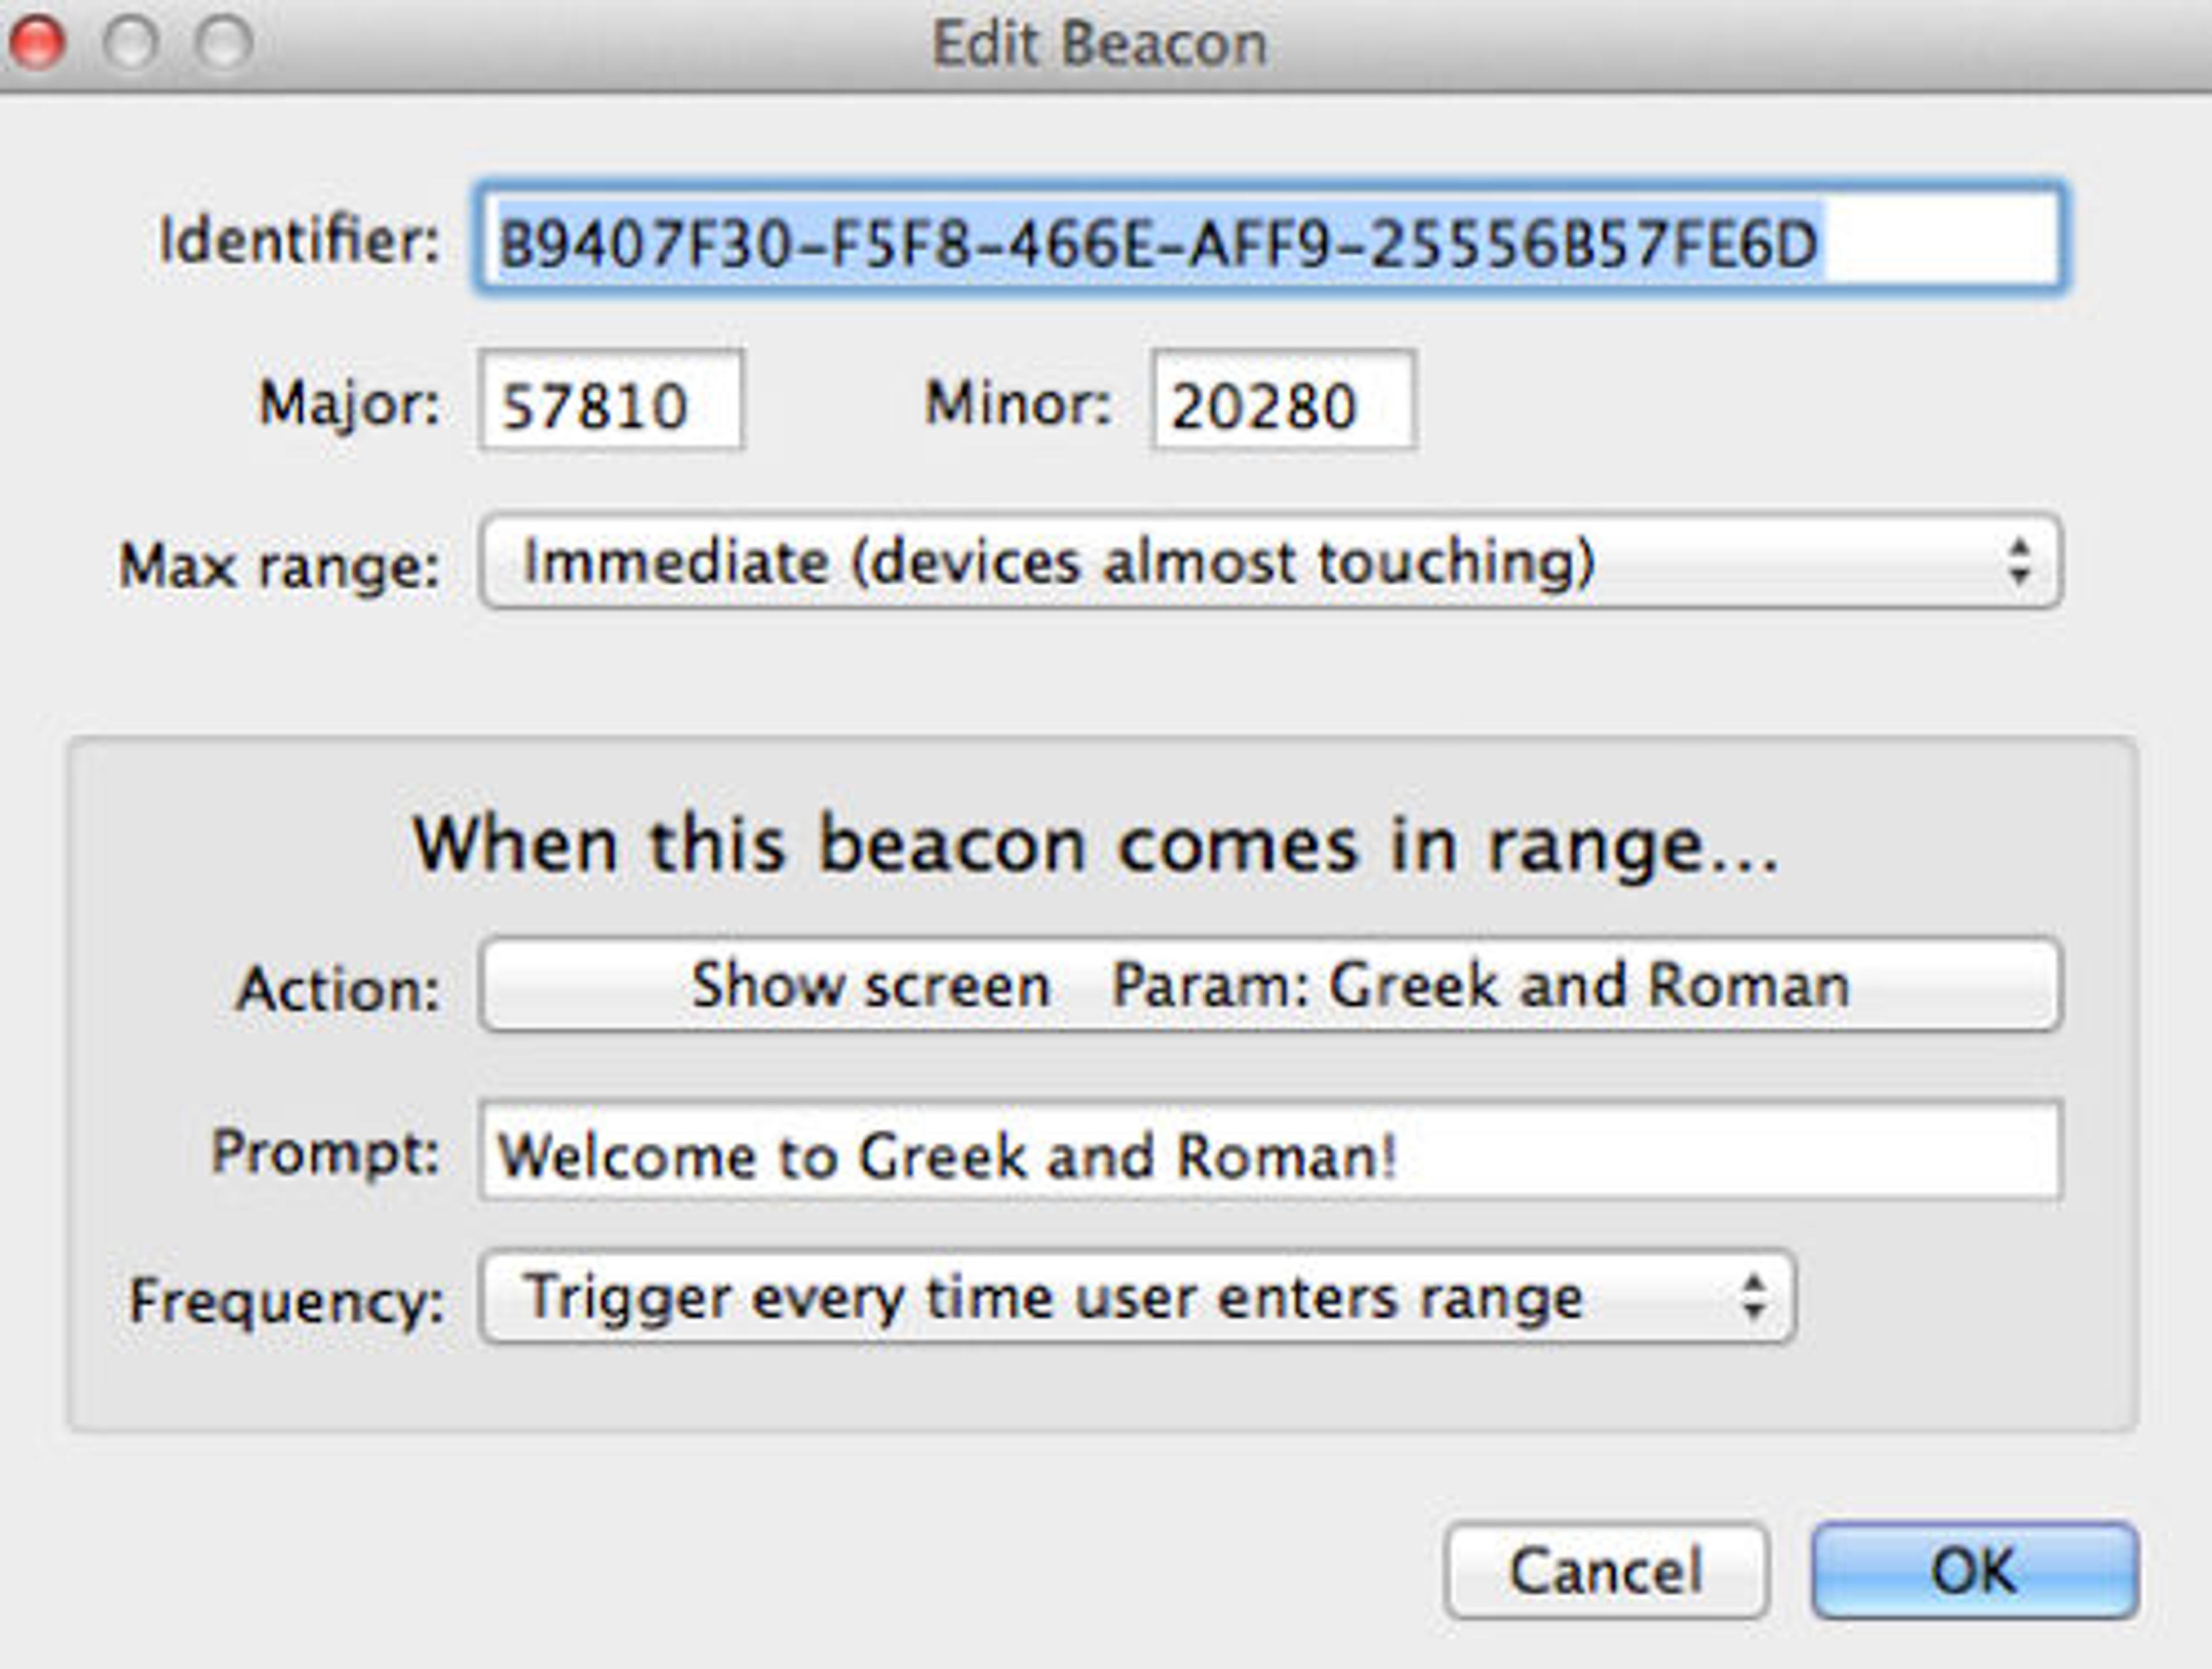 Fig. 7. Beacon editing screen in Beacondo. The interface allows to add new beacons, specify the desired range of contact (immediate, near, far), and specify a welcome message that prompts the user to access the content.